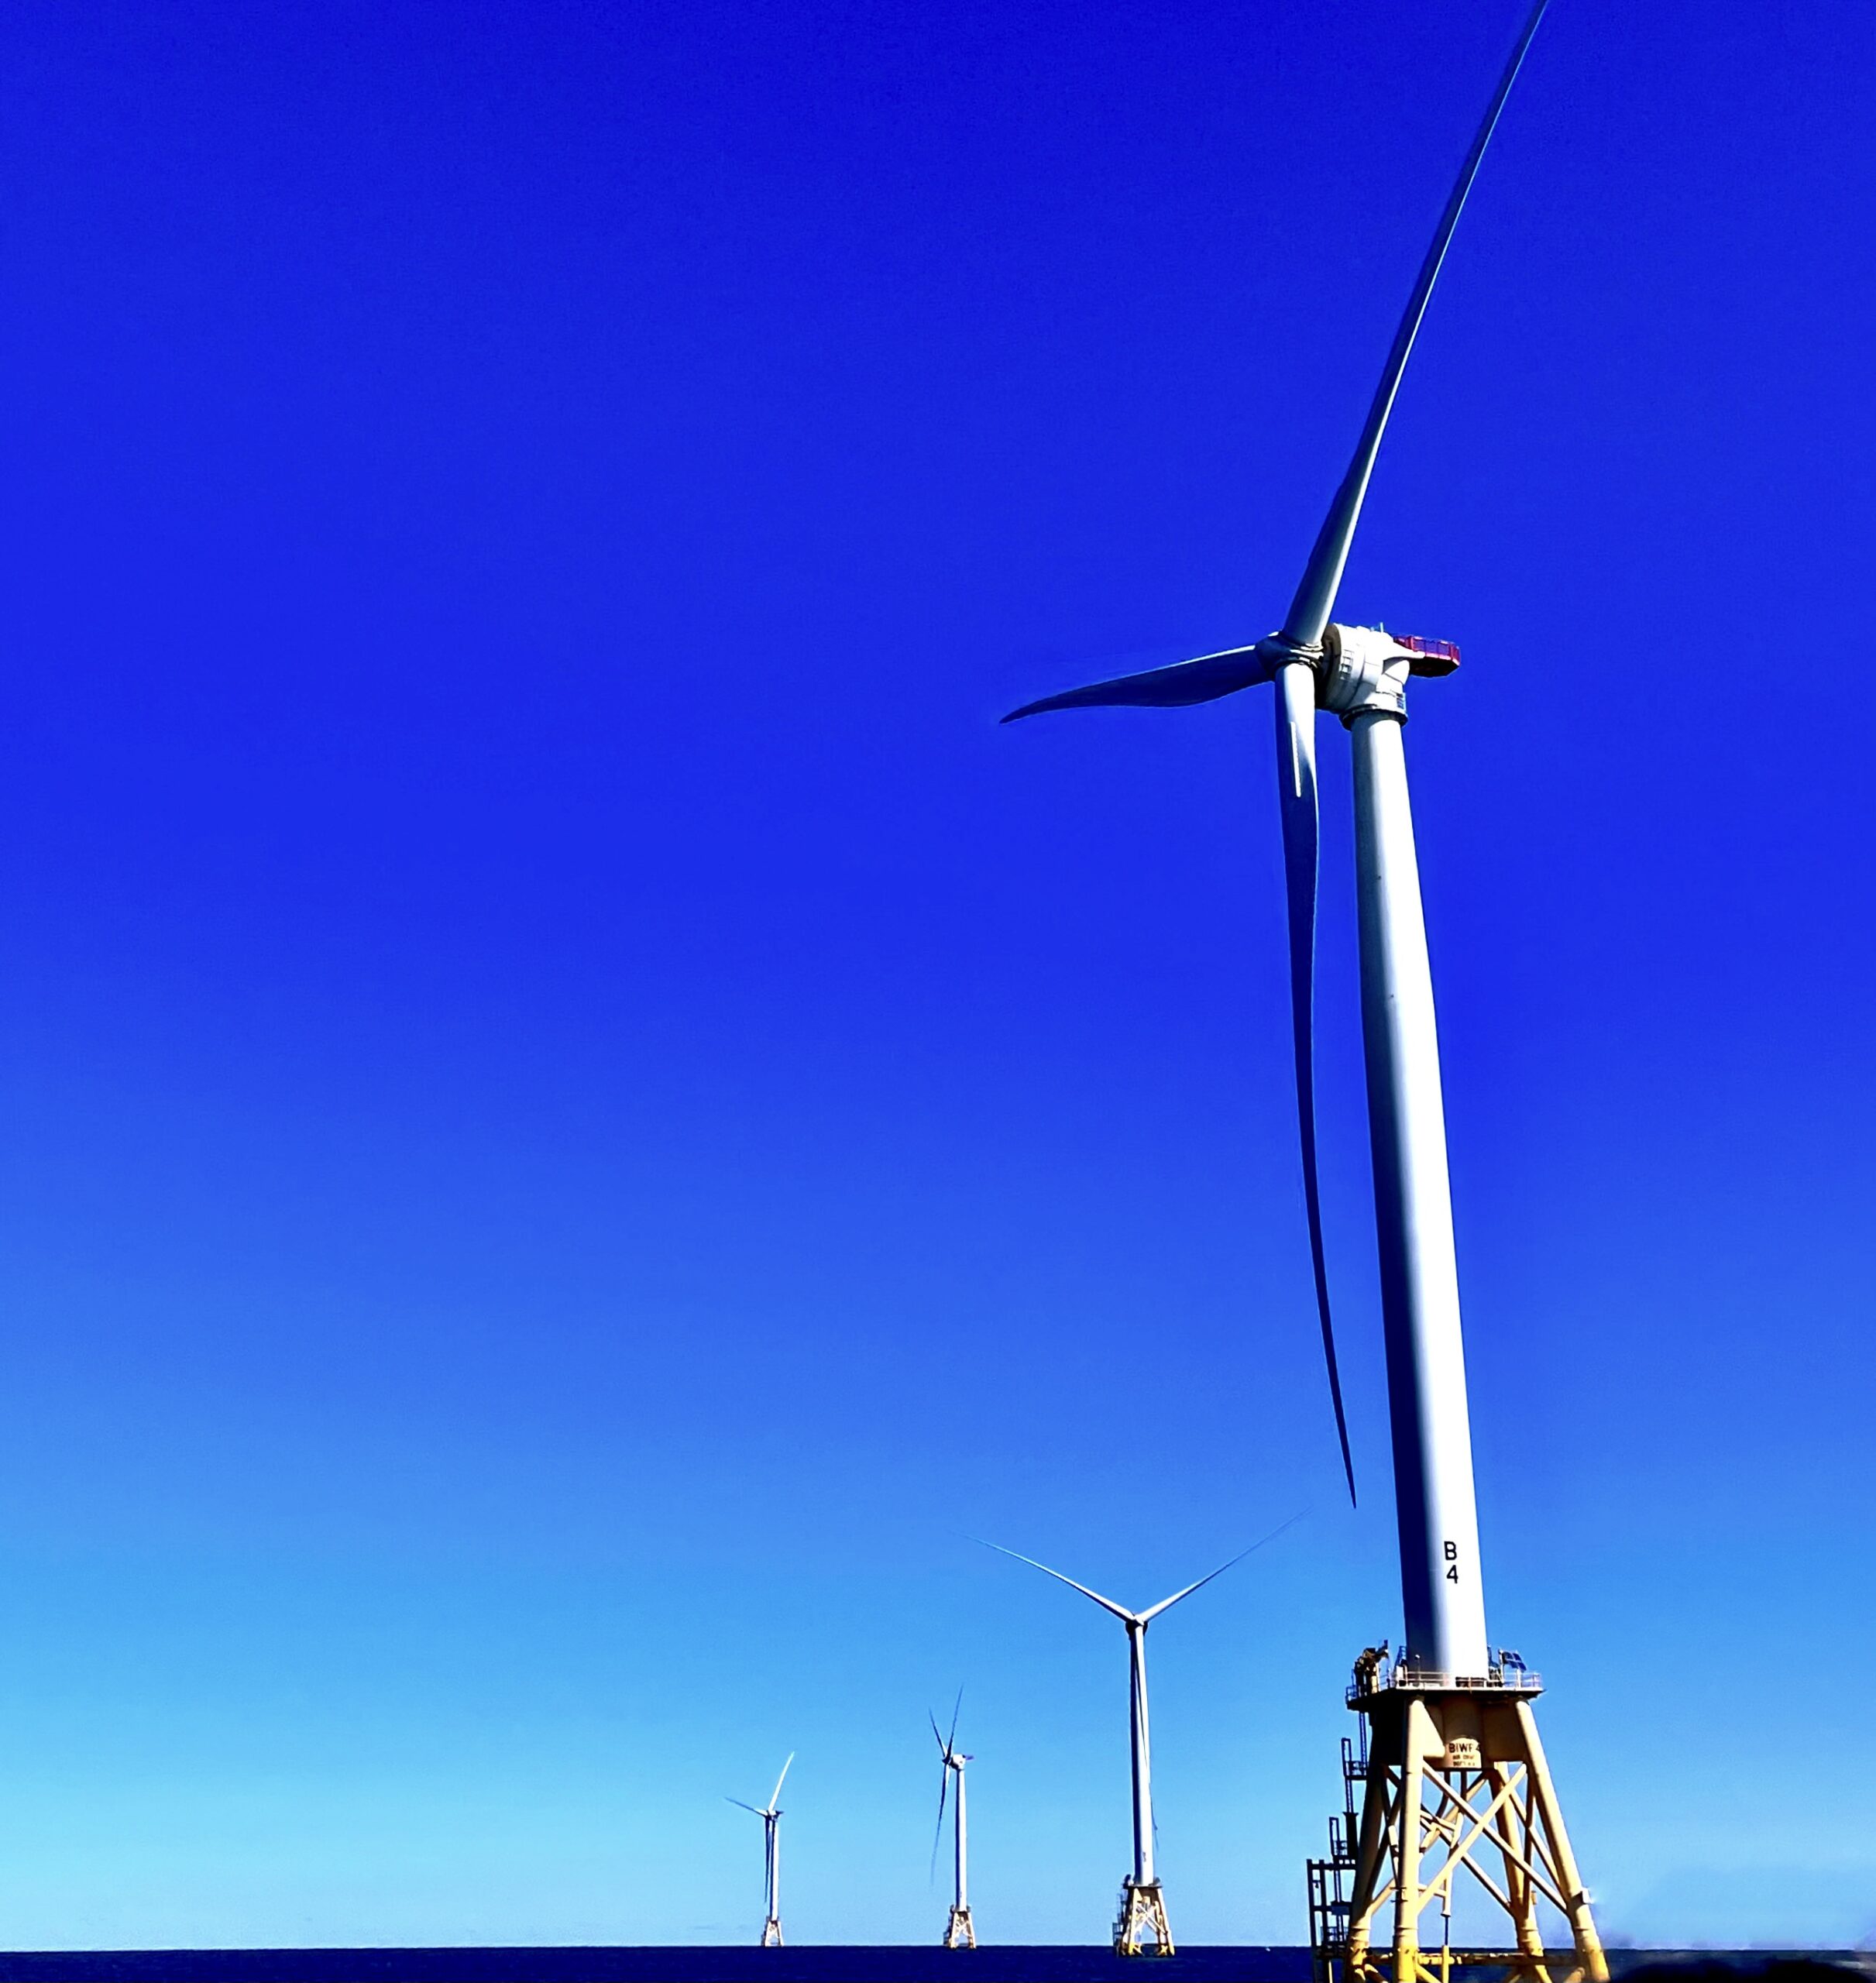 Severl wind turbines stemming from the water stand tall against a bright blue sky.